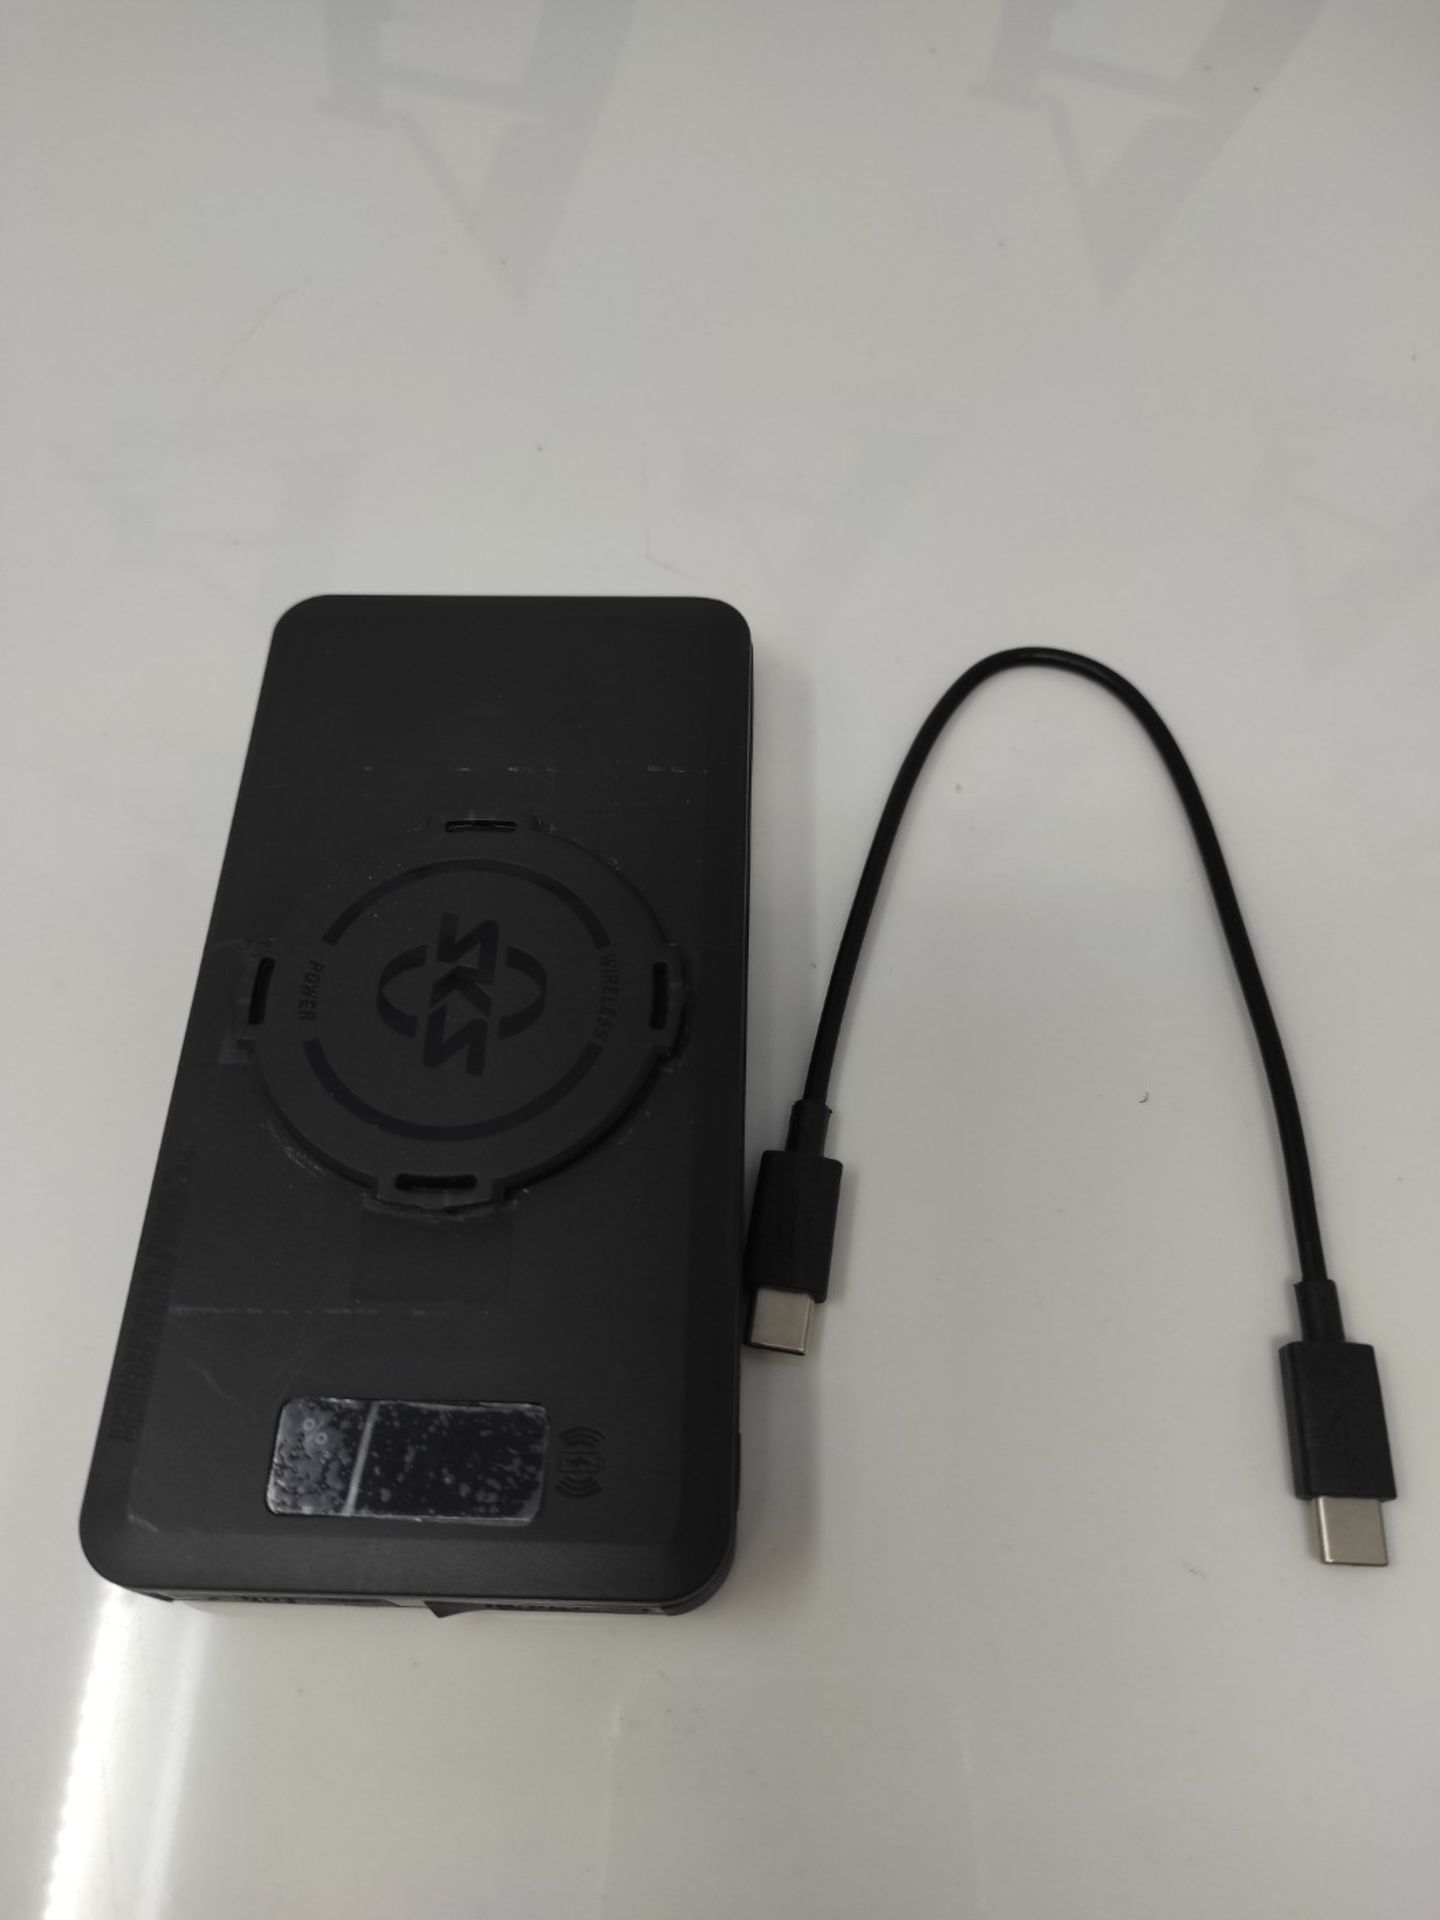 SKS GERMANY +COM/Charger 10,000 mAh Powerbank with inductive charging function for mou - Bild 3 aus 3